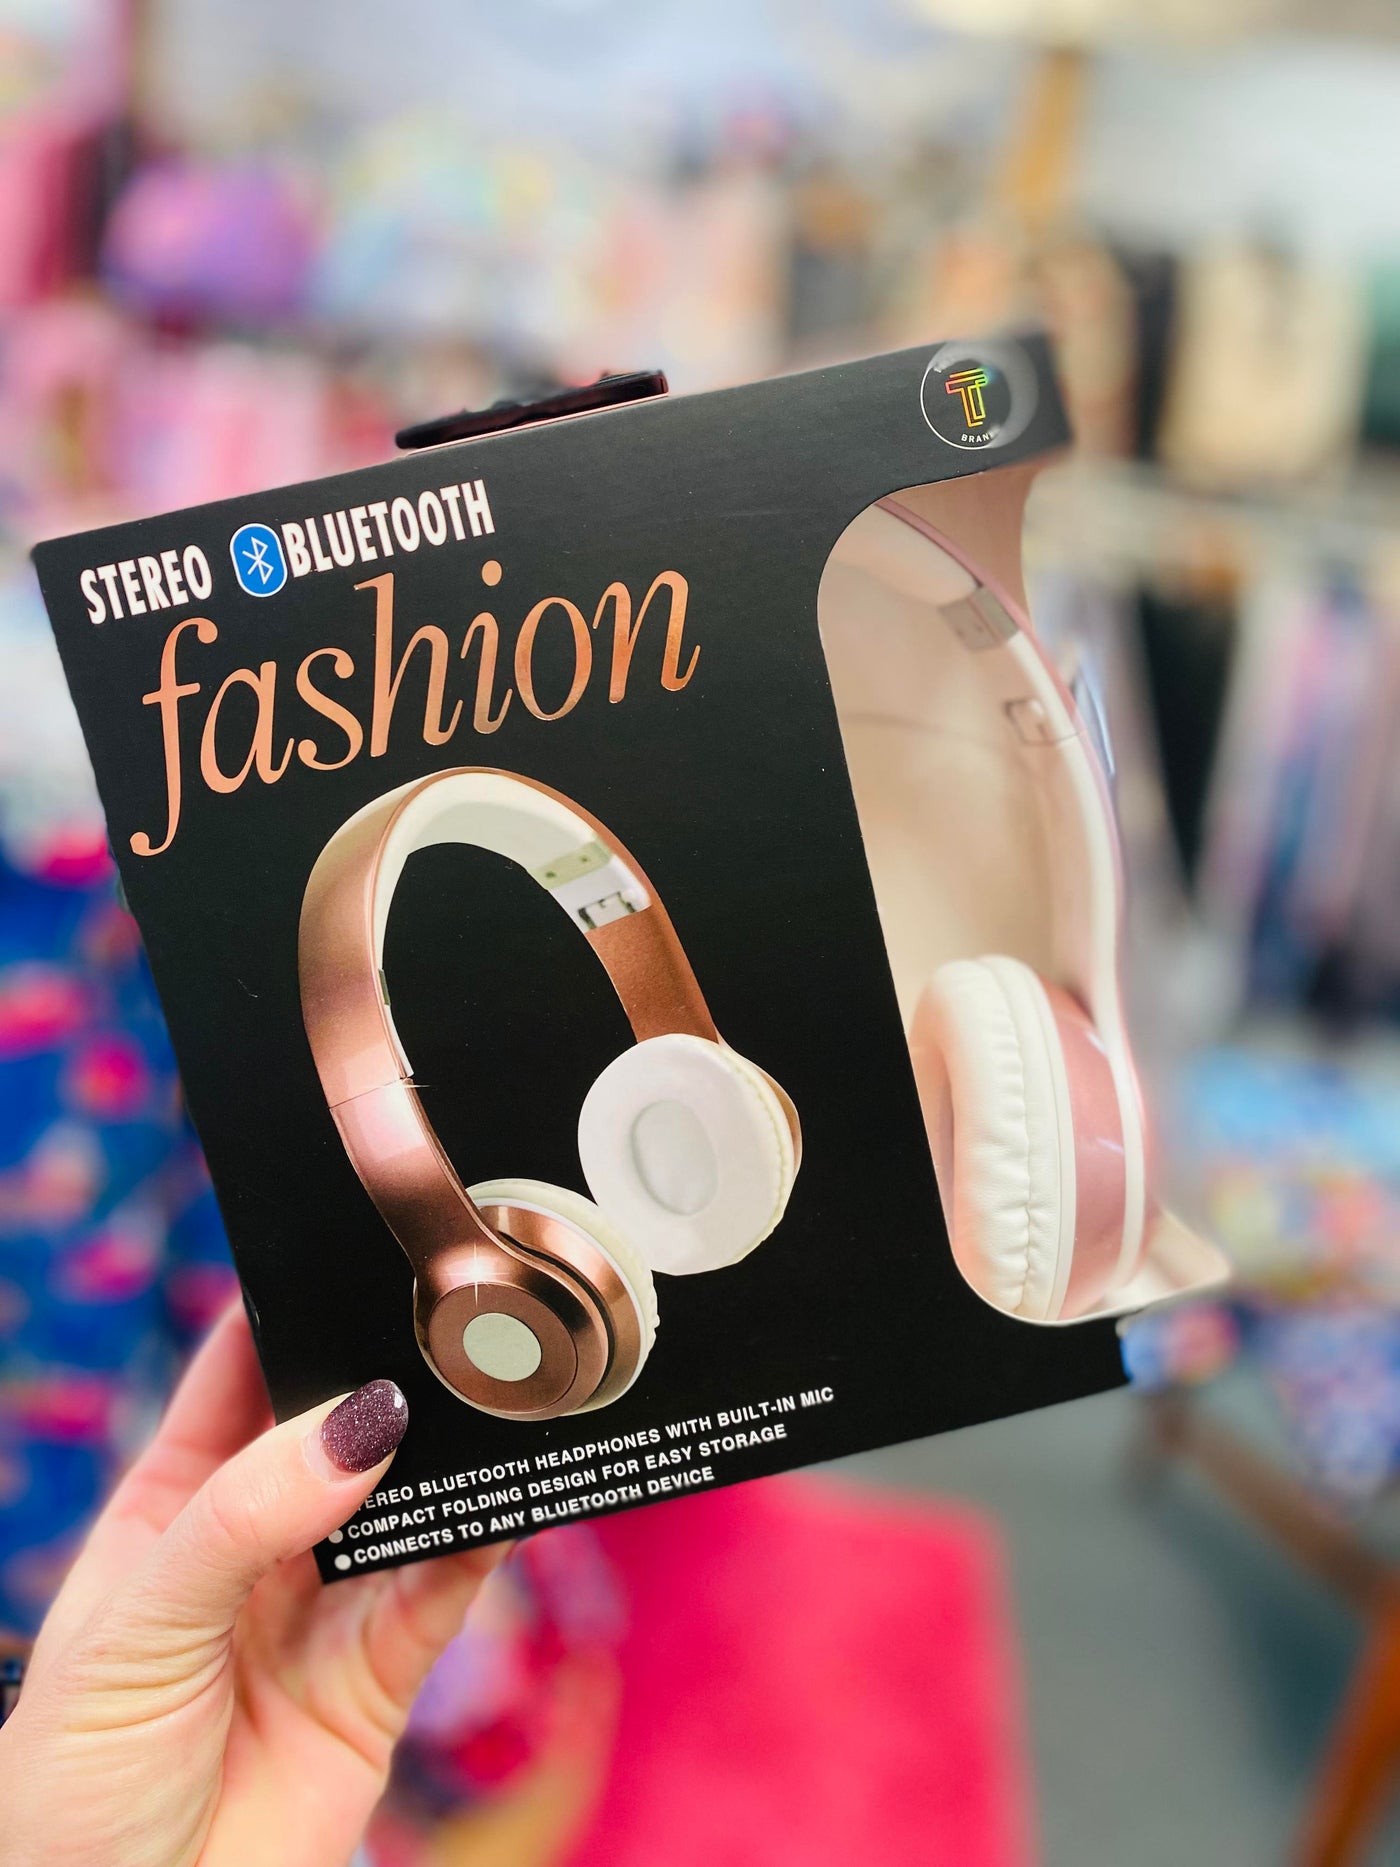 Stereo Bluetooth Head Phones - Rose Gold